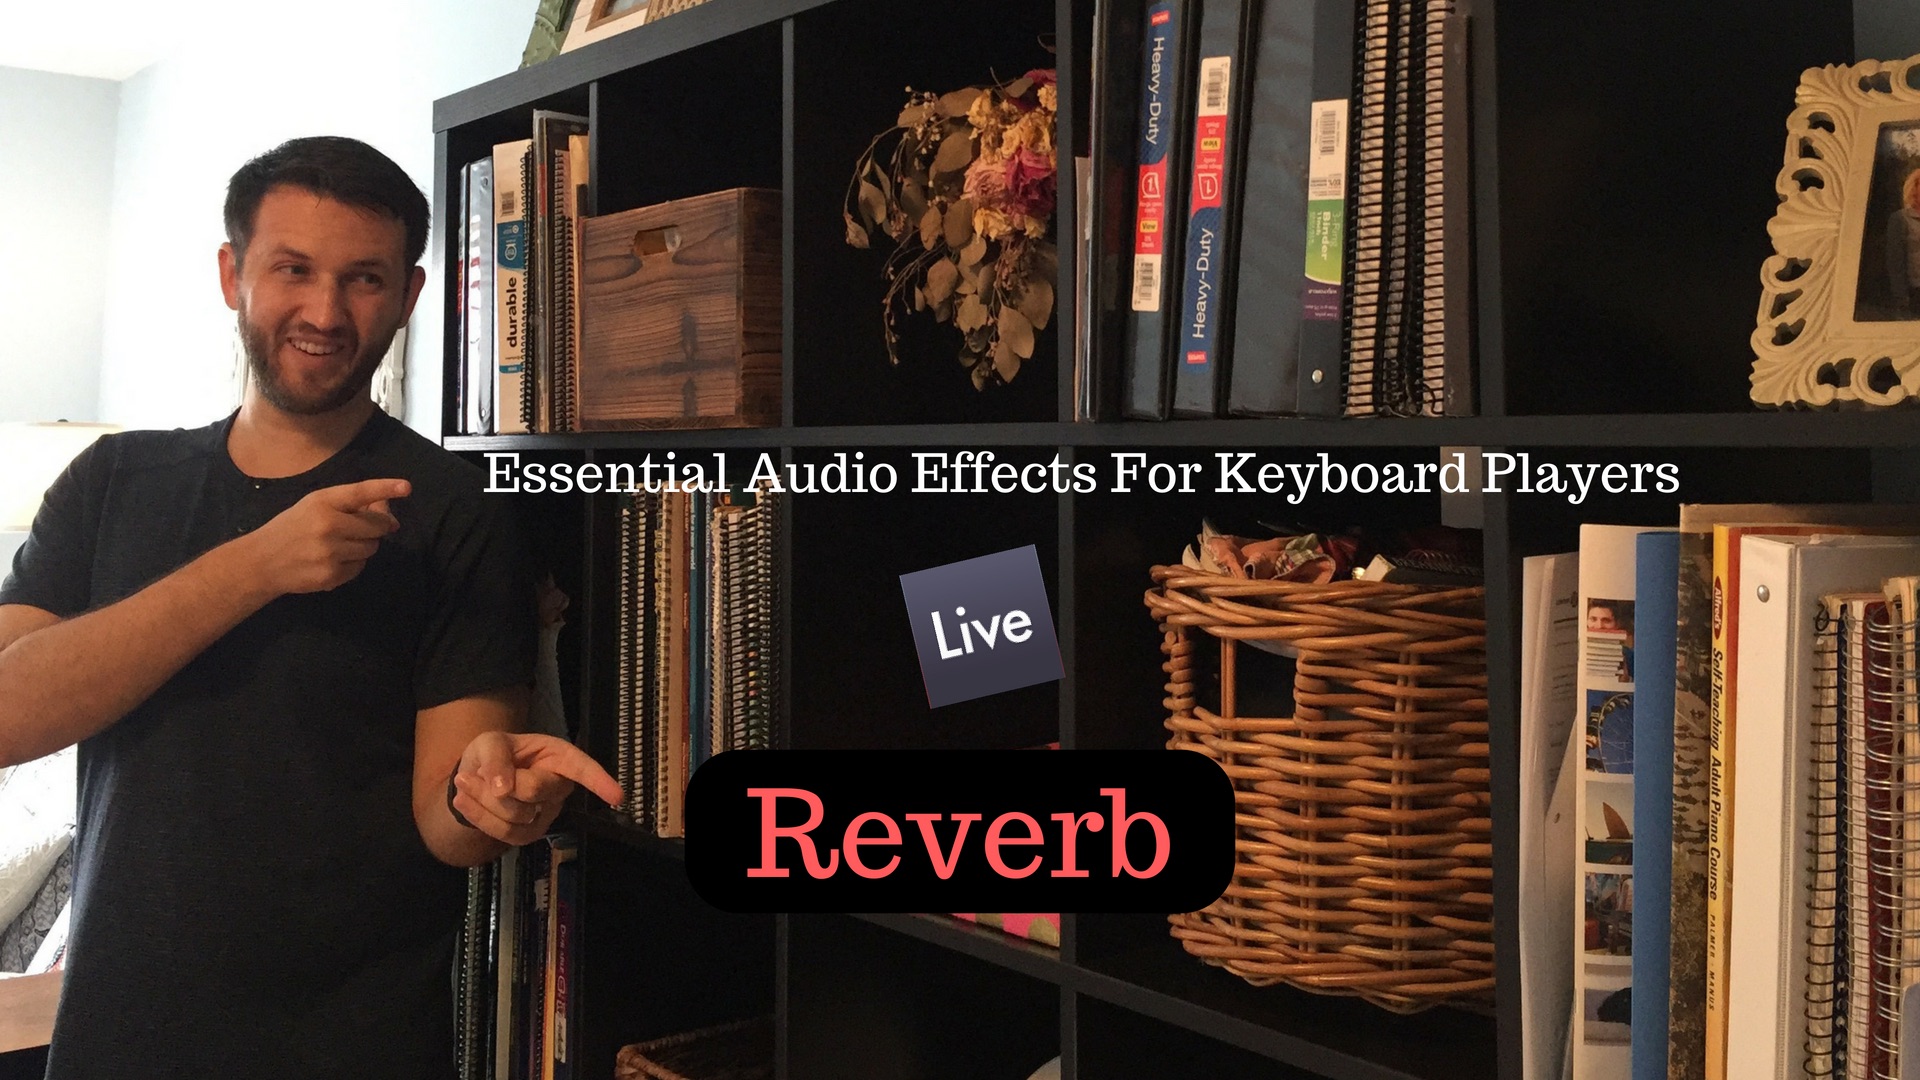 Reverb: Essential Audio Effects For Keyboard Players